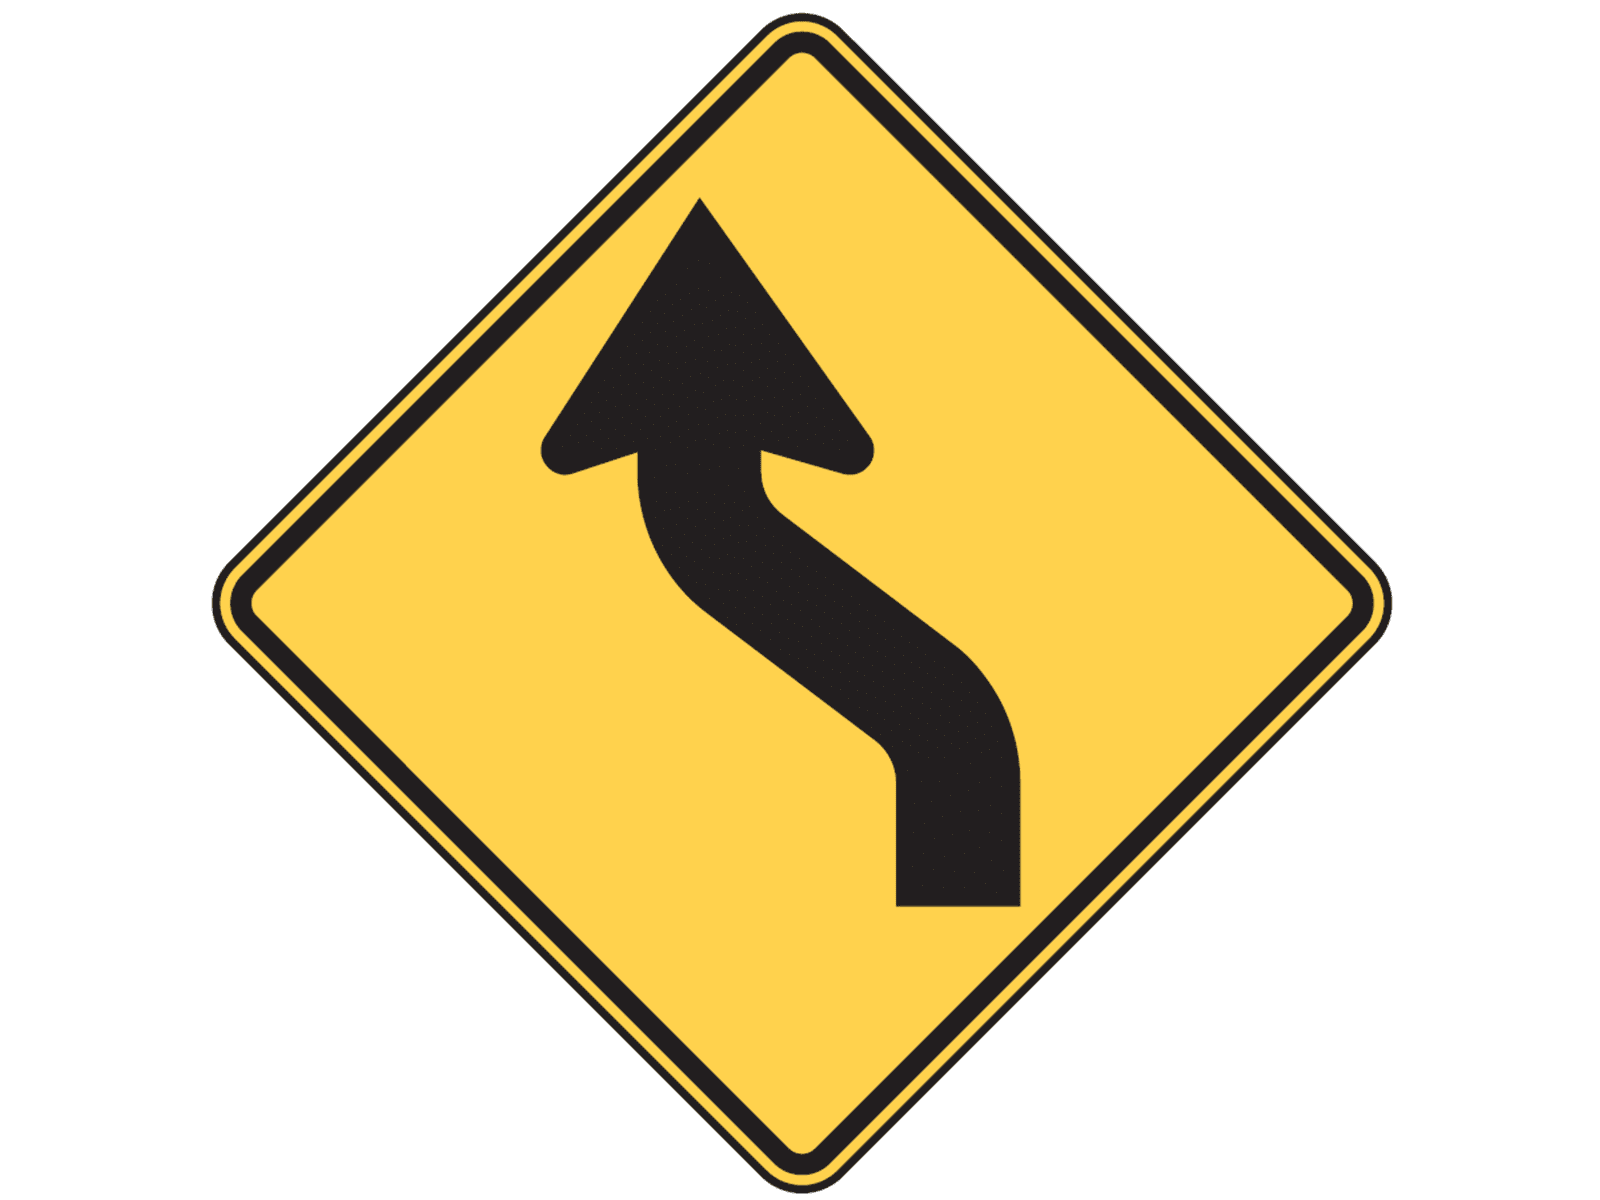 Left Reverse Curve W1-4 - W1: Curves and Turns